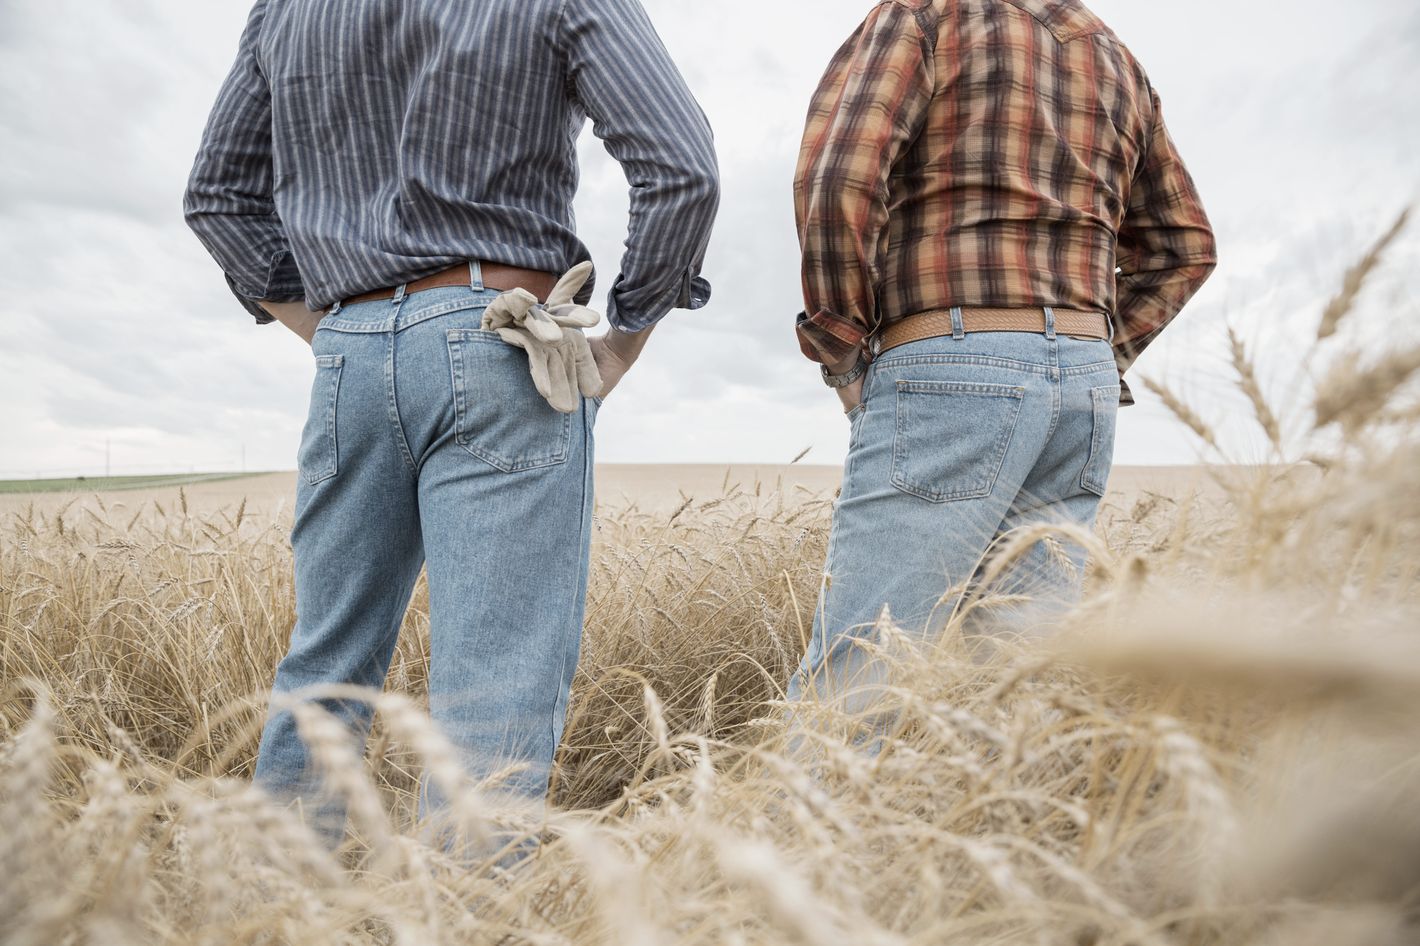 Why Straight Rural Men Have Gay Bud-Sex With Each Other -- Science of Us